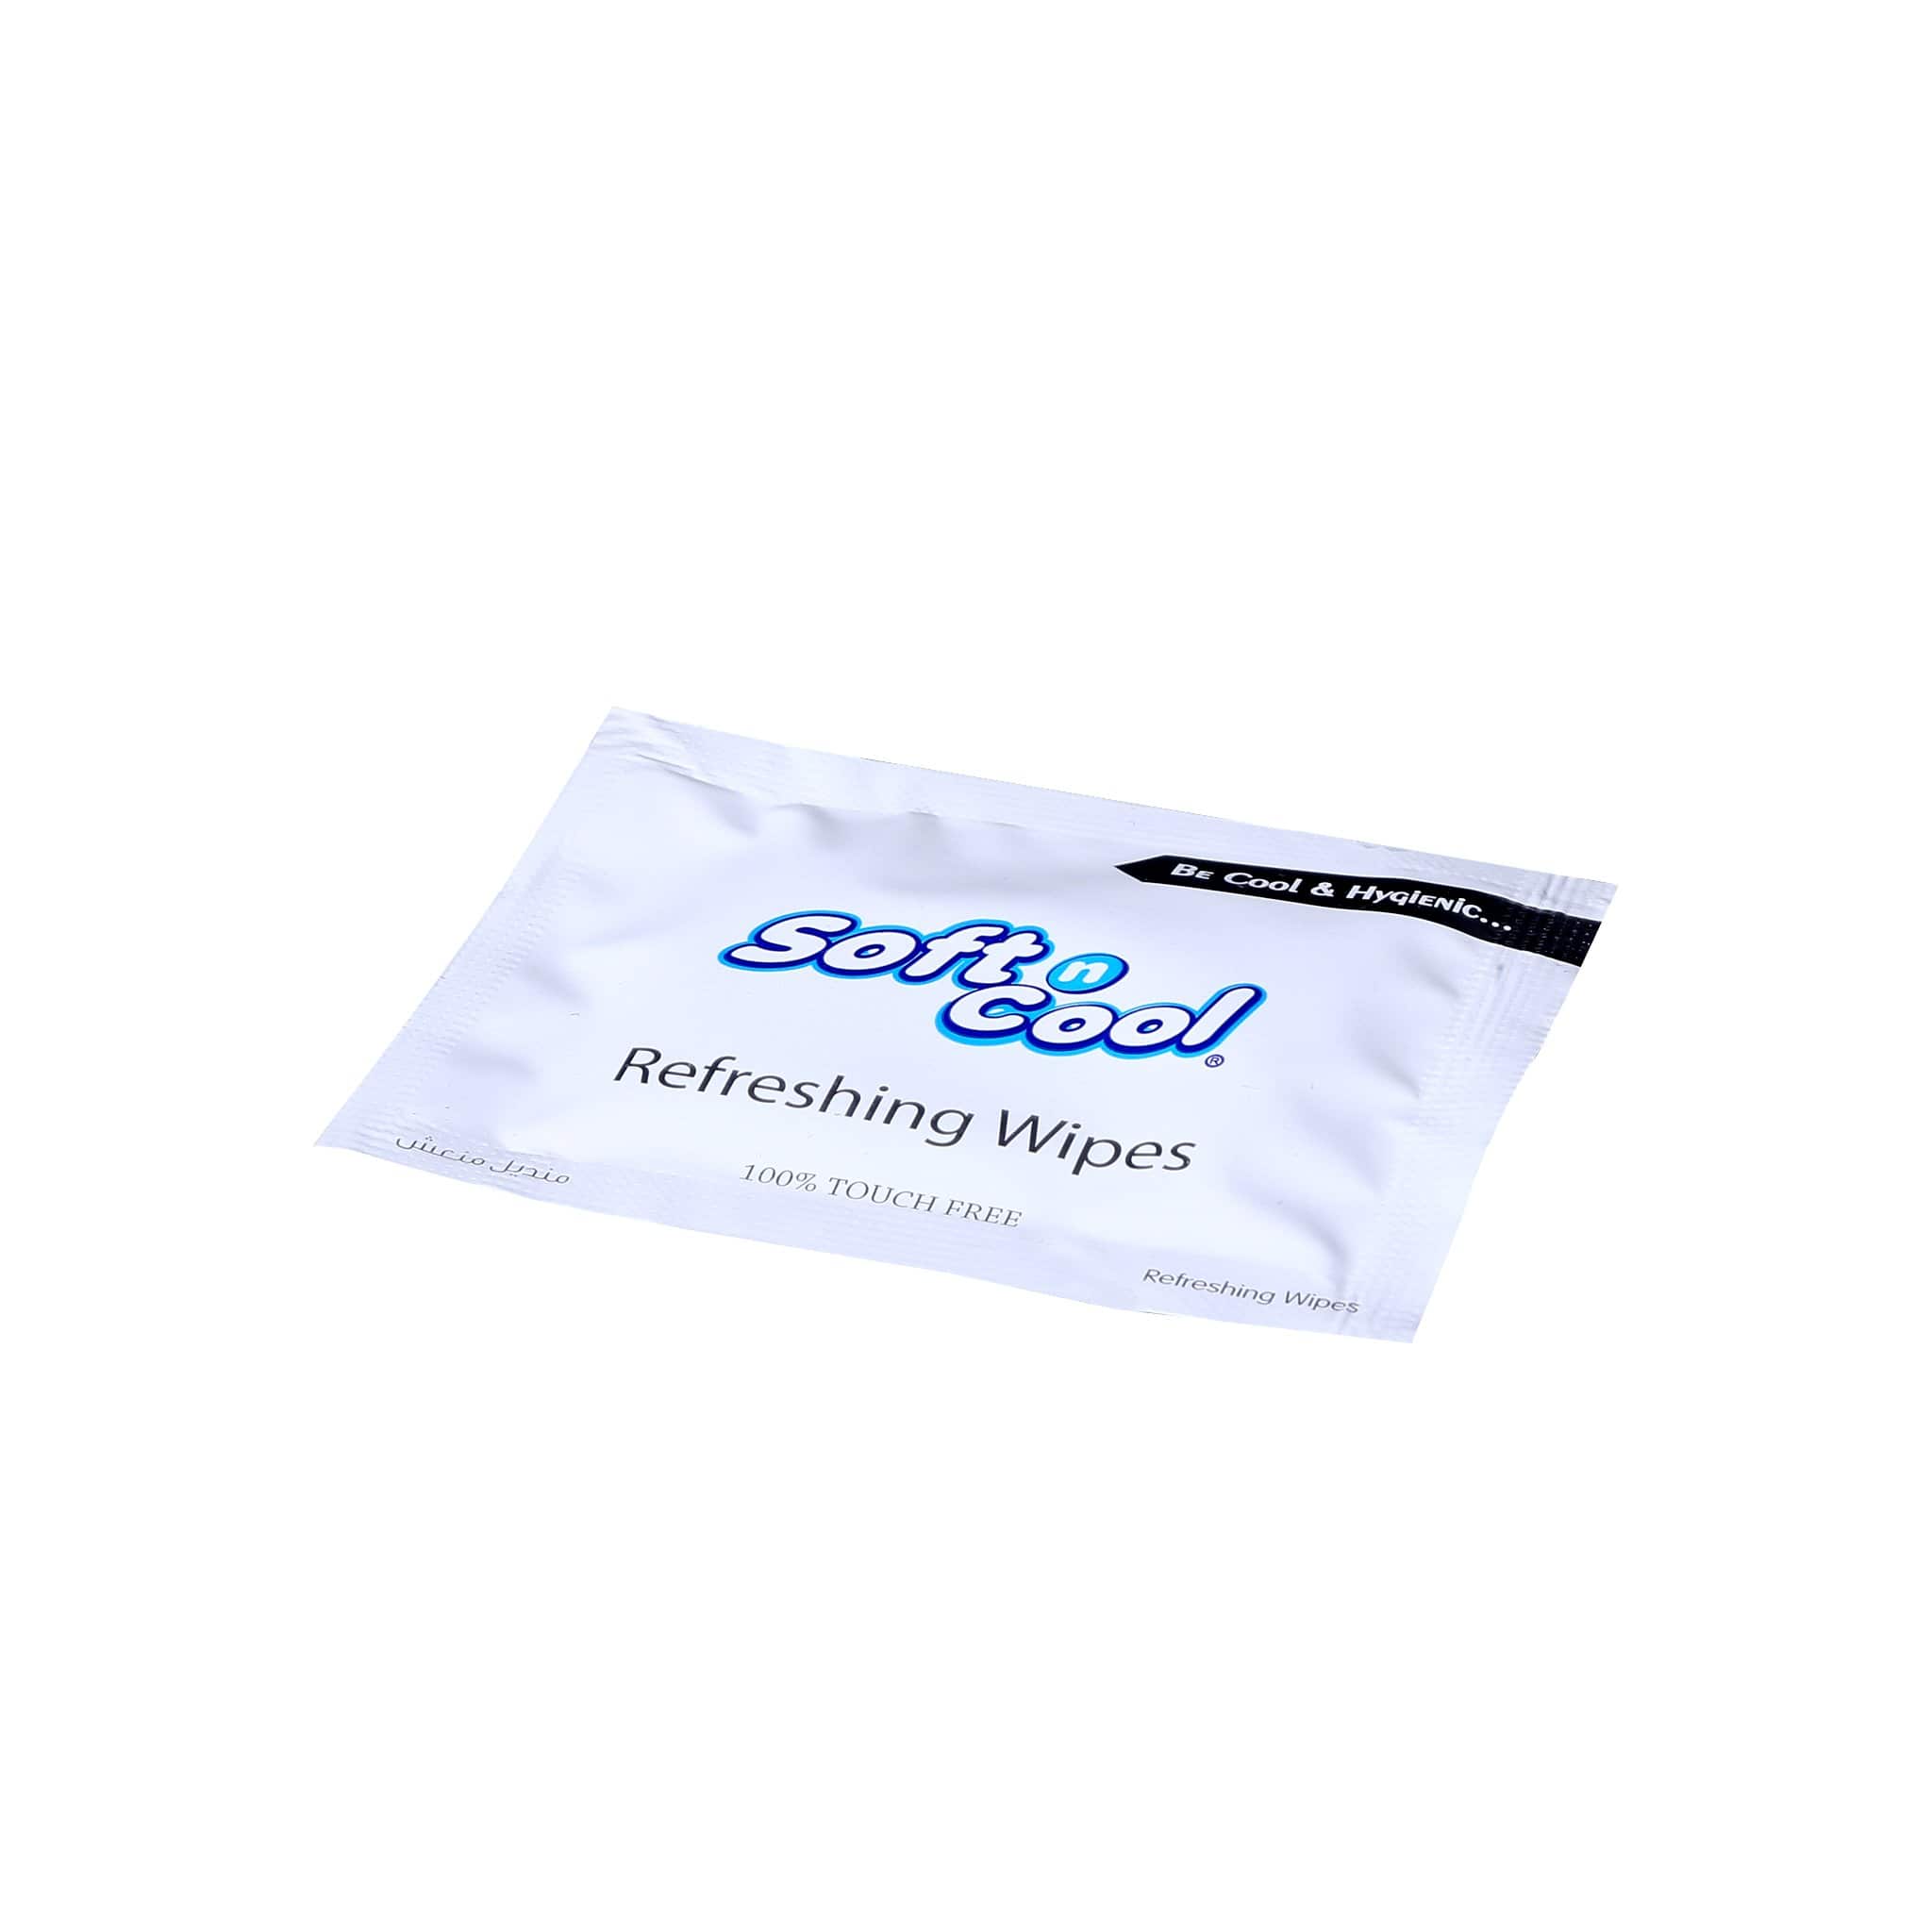 1000 Pieces Refreshing Wet Wipes Large 7cm * 11cm